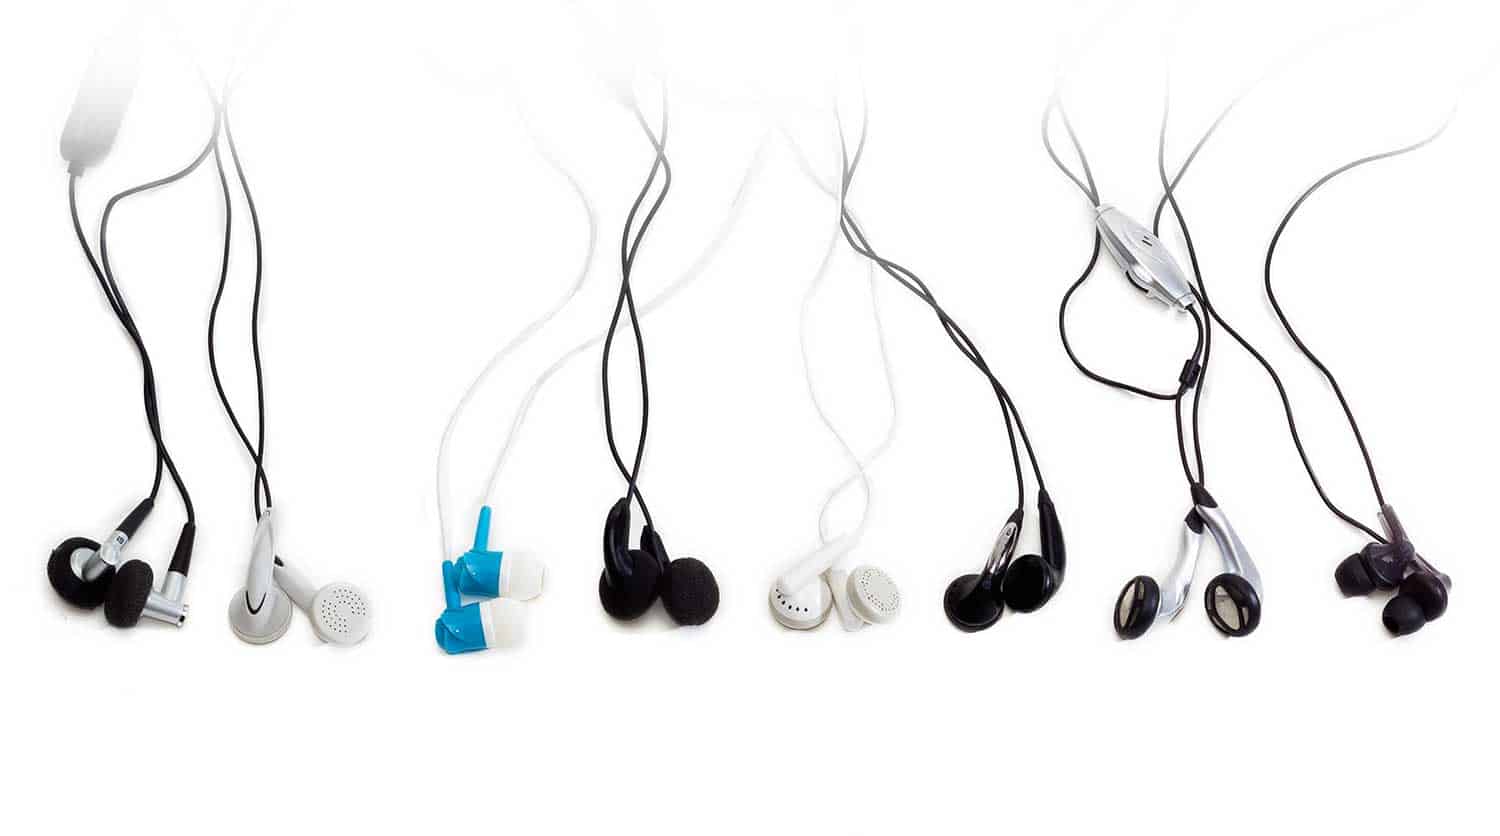 Several various earbuds on a light background